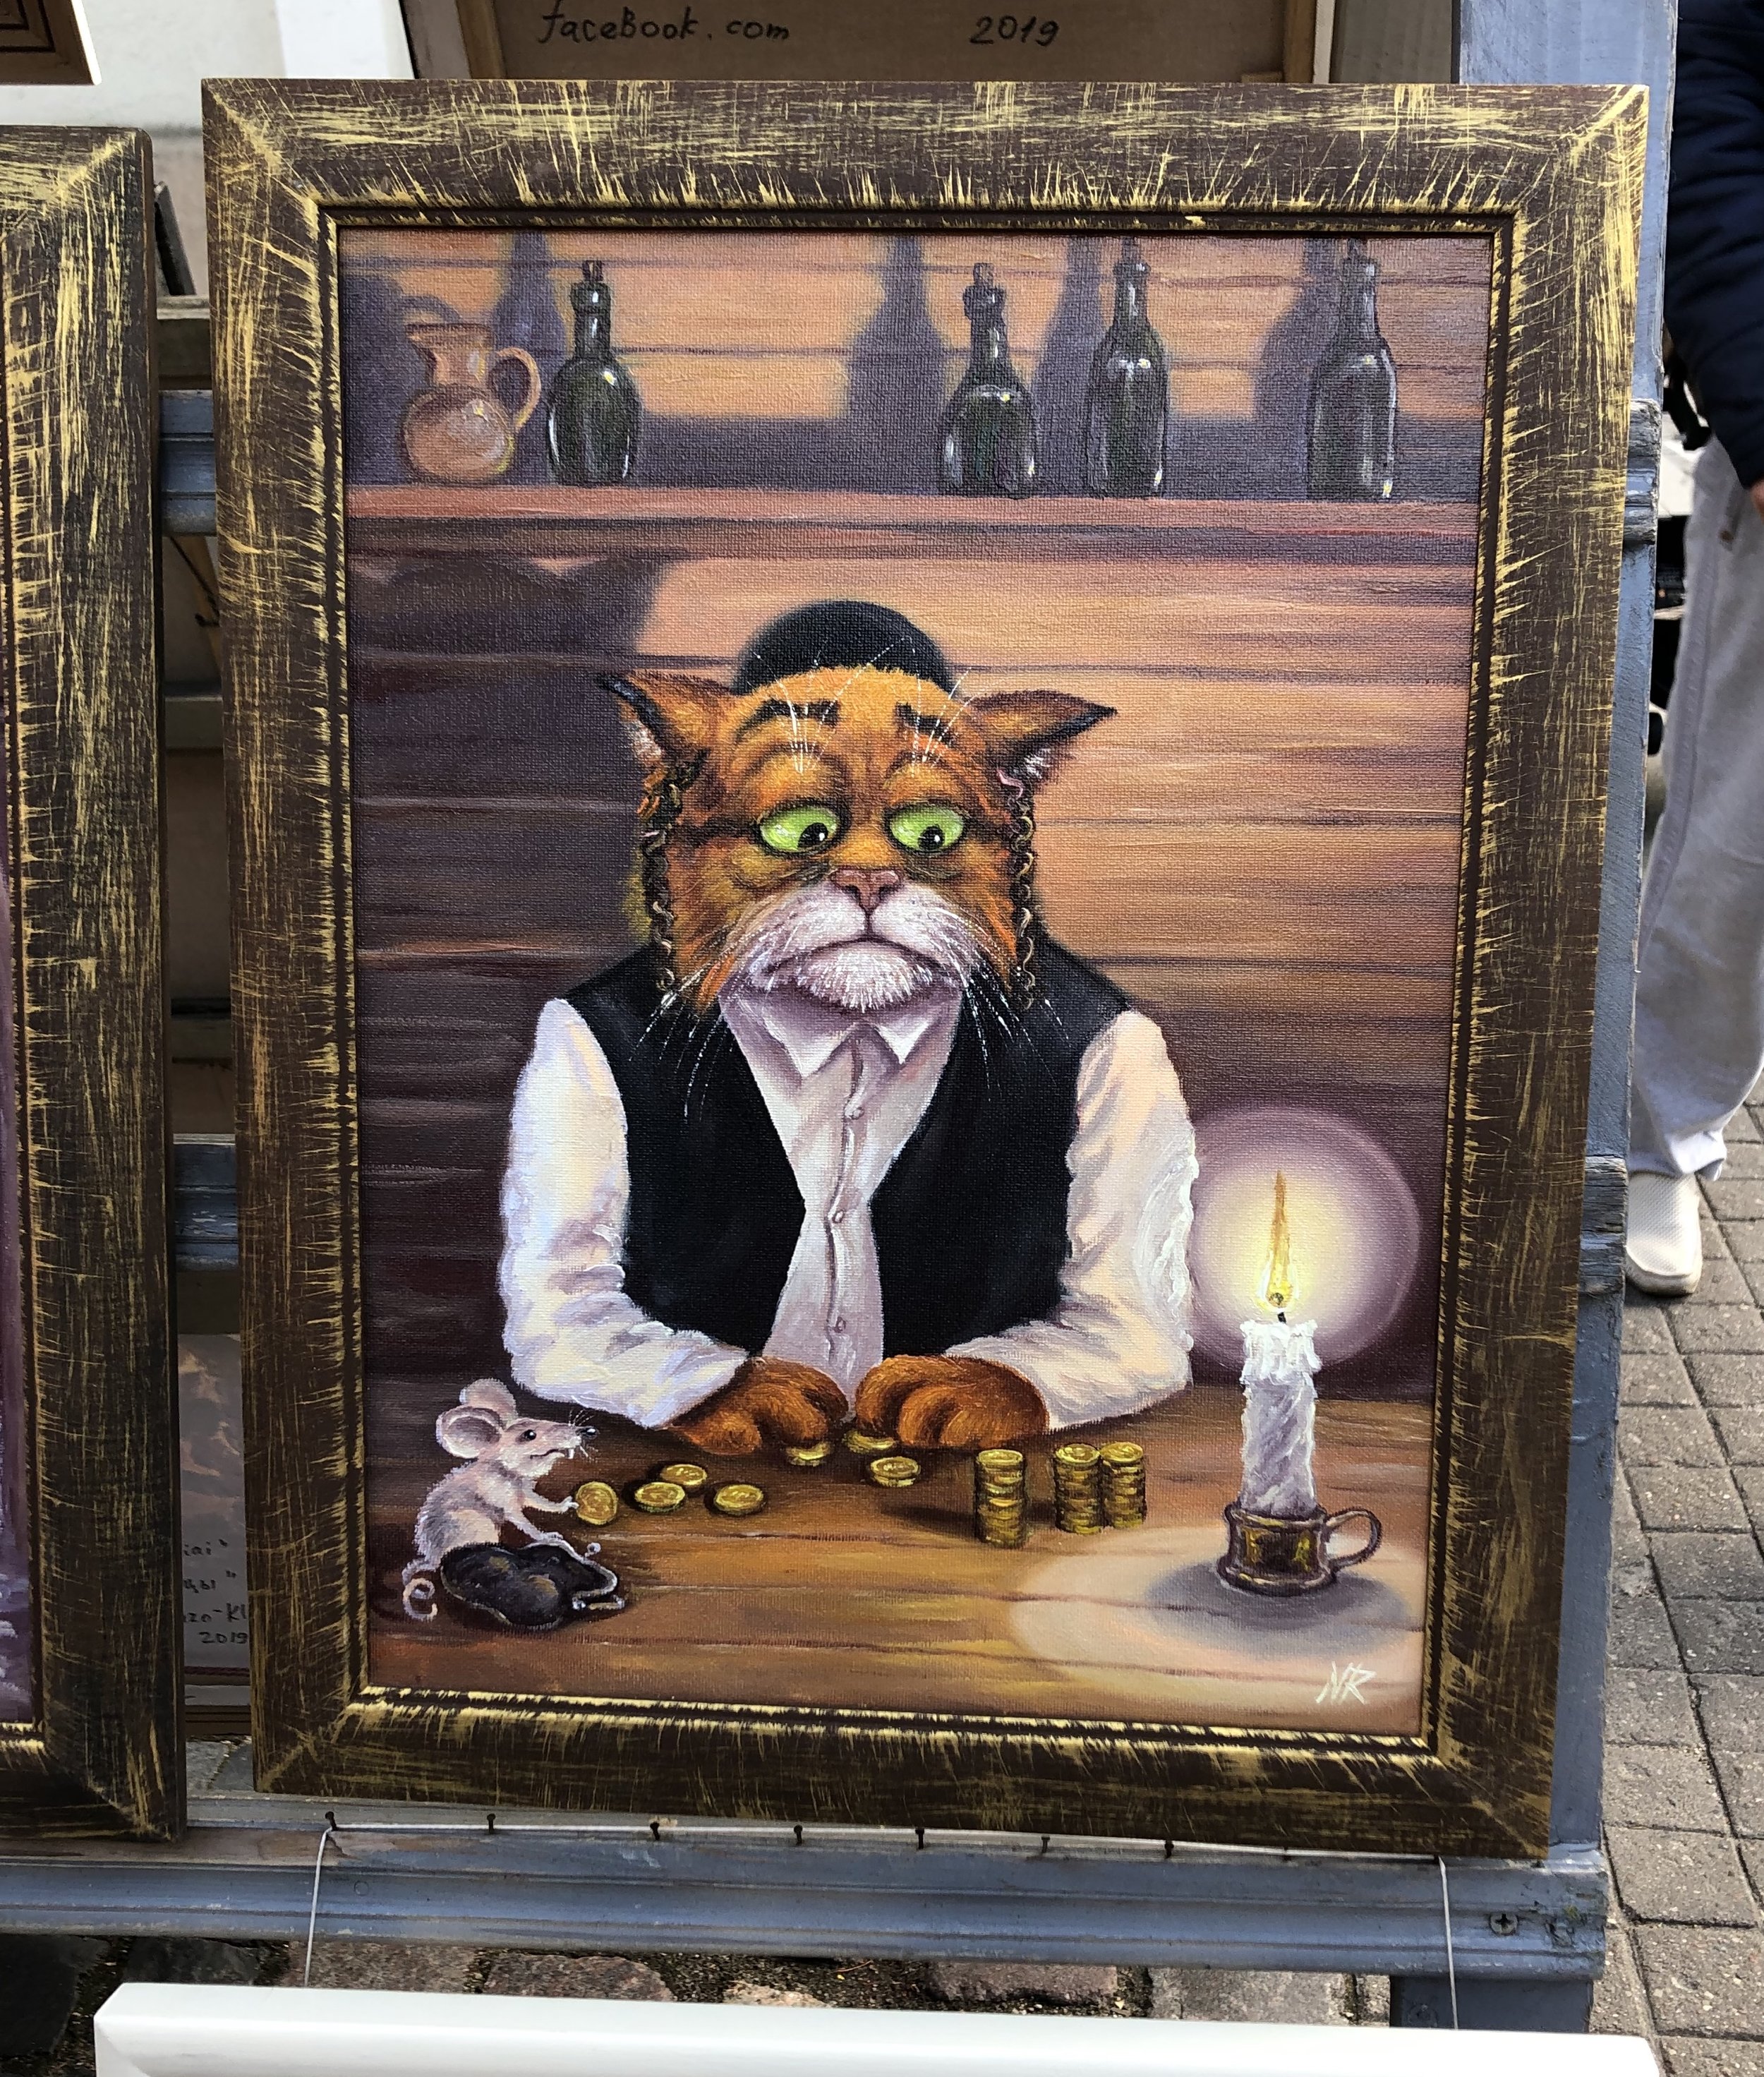  On a walk back to the hotel we came upon this disturbing anti-semitic painting being sold in an open air market in the old town of Vilnius. Moments such as this taint the moments of joy we experienced. To me, this proves that our work is never done until all hatred is eradicated. 